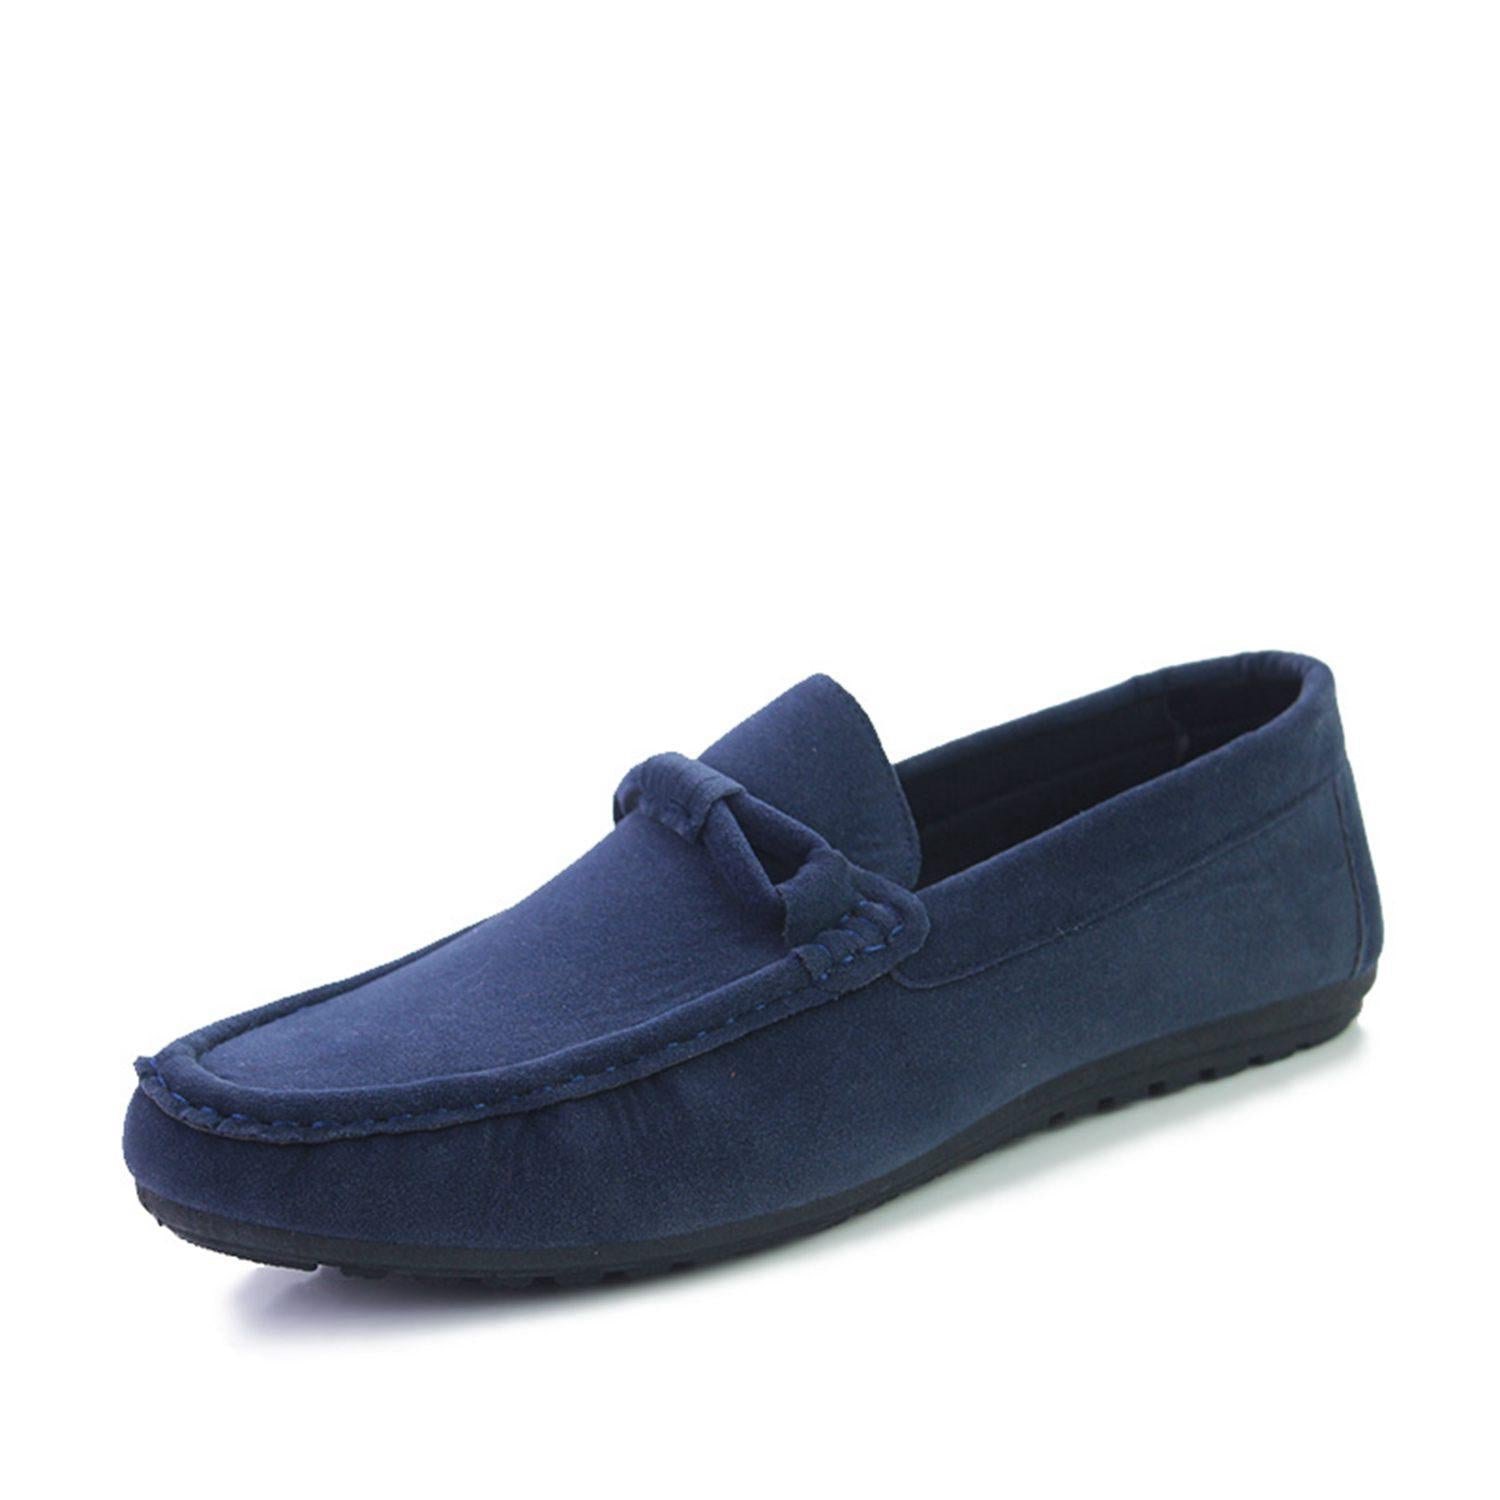 Suede Leather Men Flats 2018 New Soft Men Casual Shoes High Quality Men Loafers Flats Gommino Driving Shoes - ebowsos